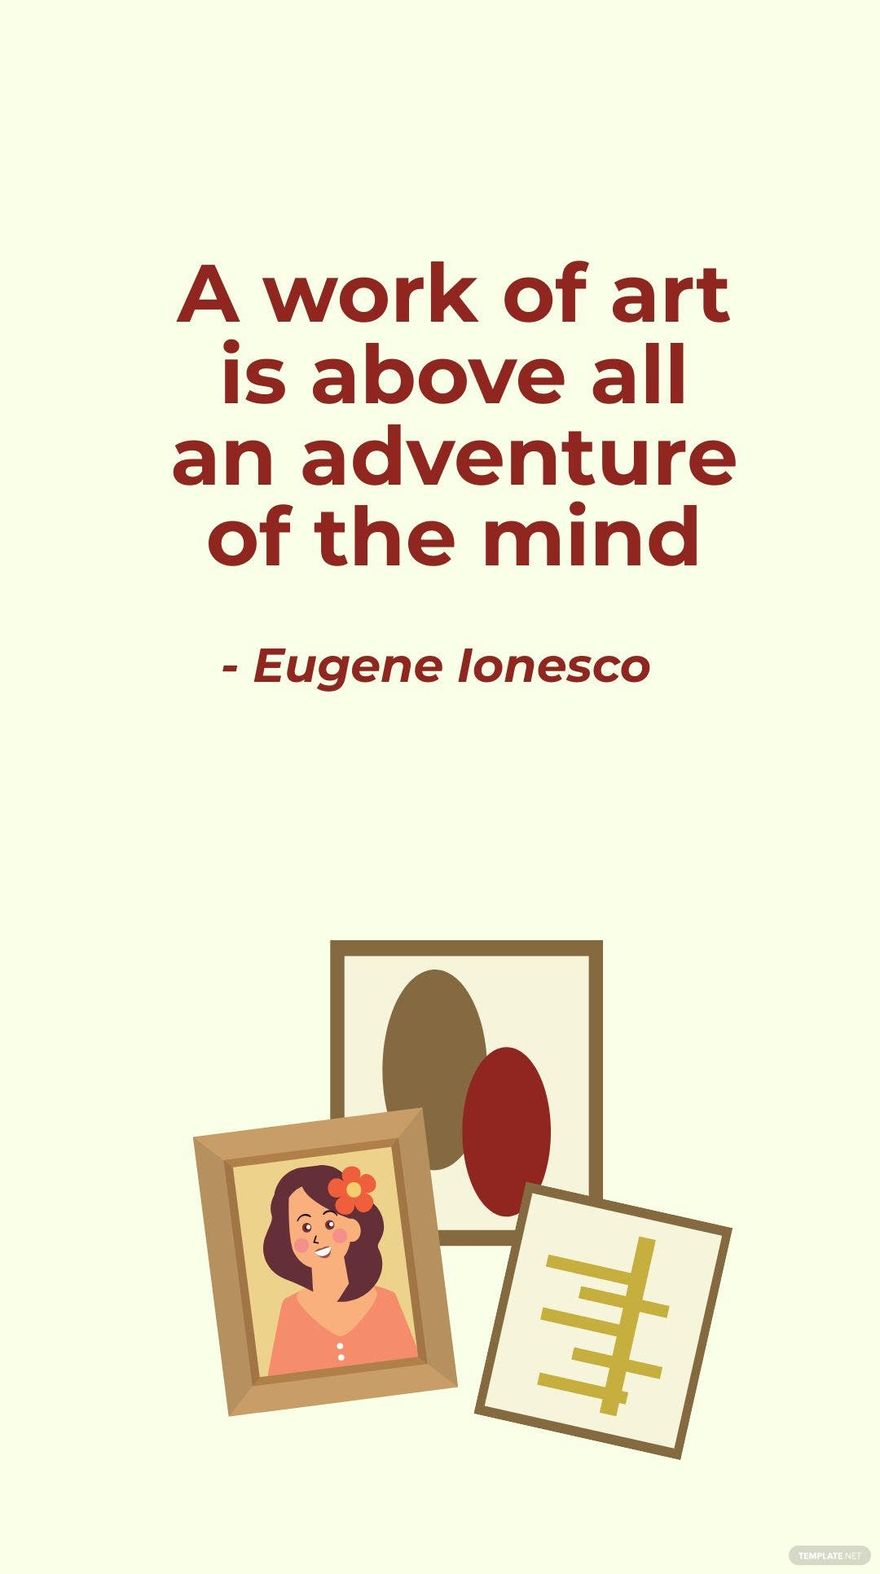 Free Eugene Ionesco - A work of art is above all an adventure of the mind in JPG